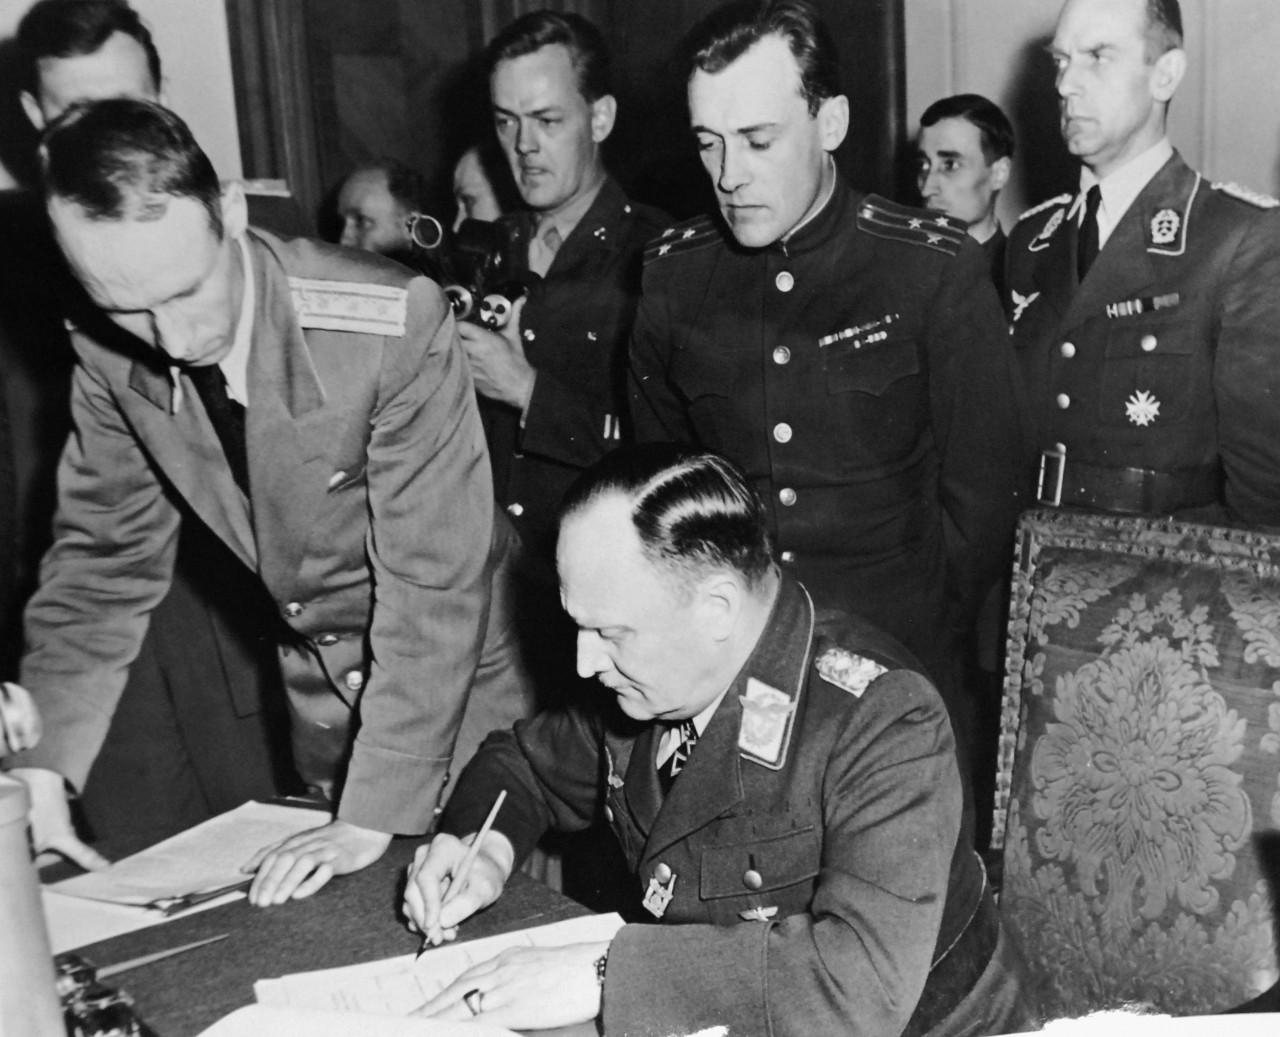 111-SC-27431: Surrender of Germany, 9 May 1945.  Colonel General P H. Stumpf, signing the ratified surrender terms for the extinct Luftwaffe at the Russian Headquarters in Berlin, Germany.  U.S. Army Photograph.  Courtesy of the Library of Congress Collection, Lot-8988. (2015/10/16).